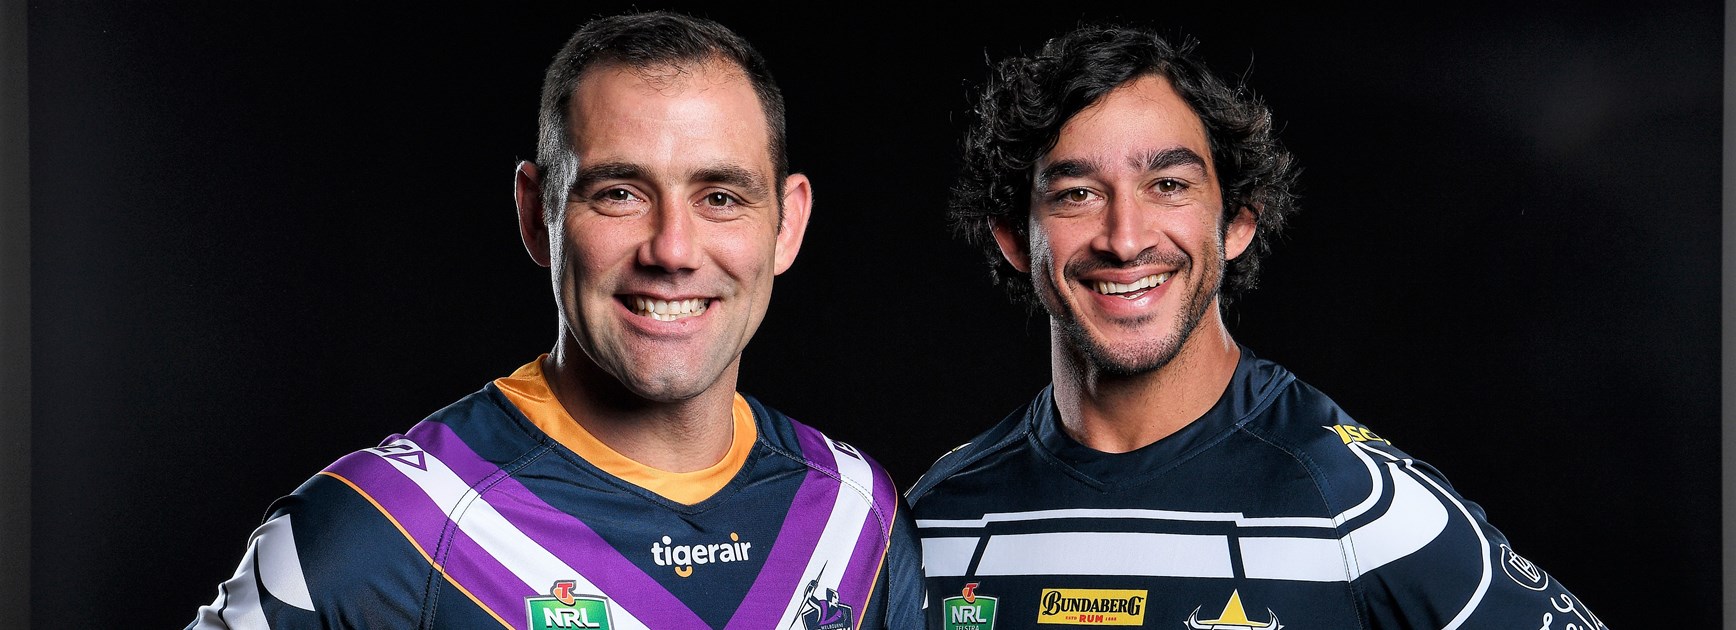 Cameron Smith and Johnathan Thurston at the NRL launch.